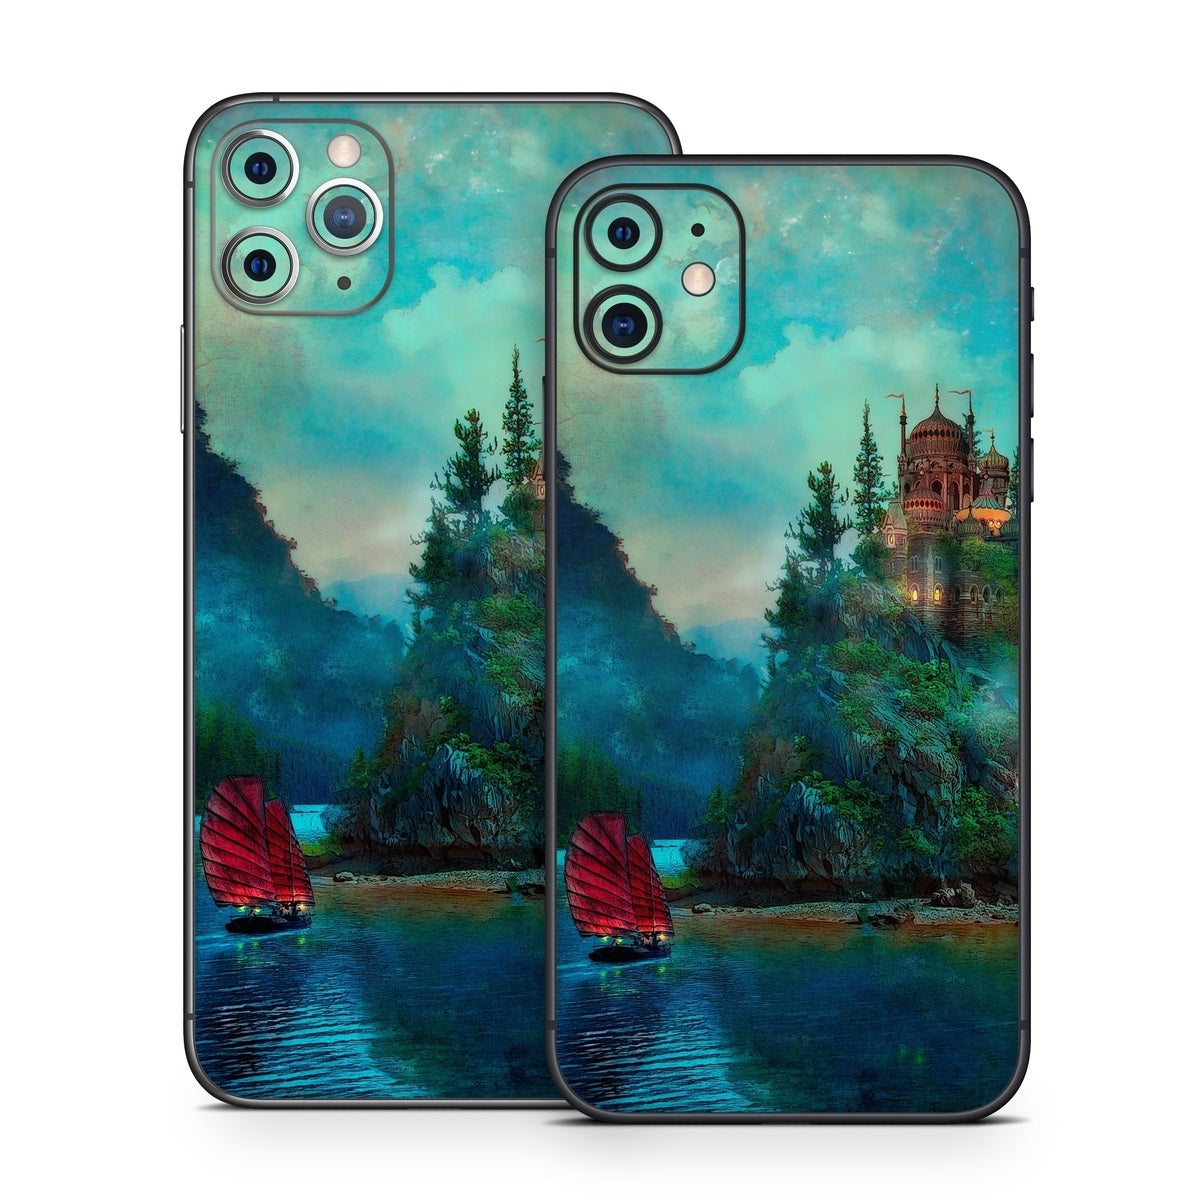 Journey's End - Apple iPhone 11 Skin